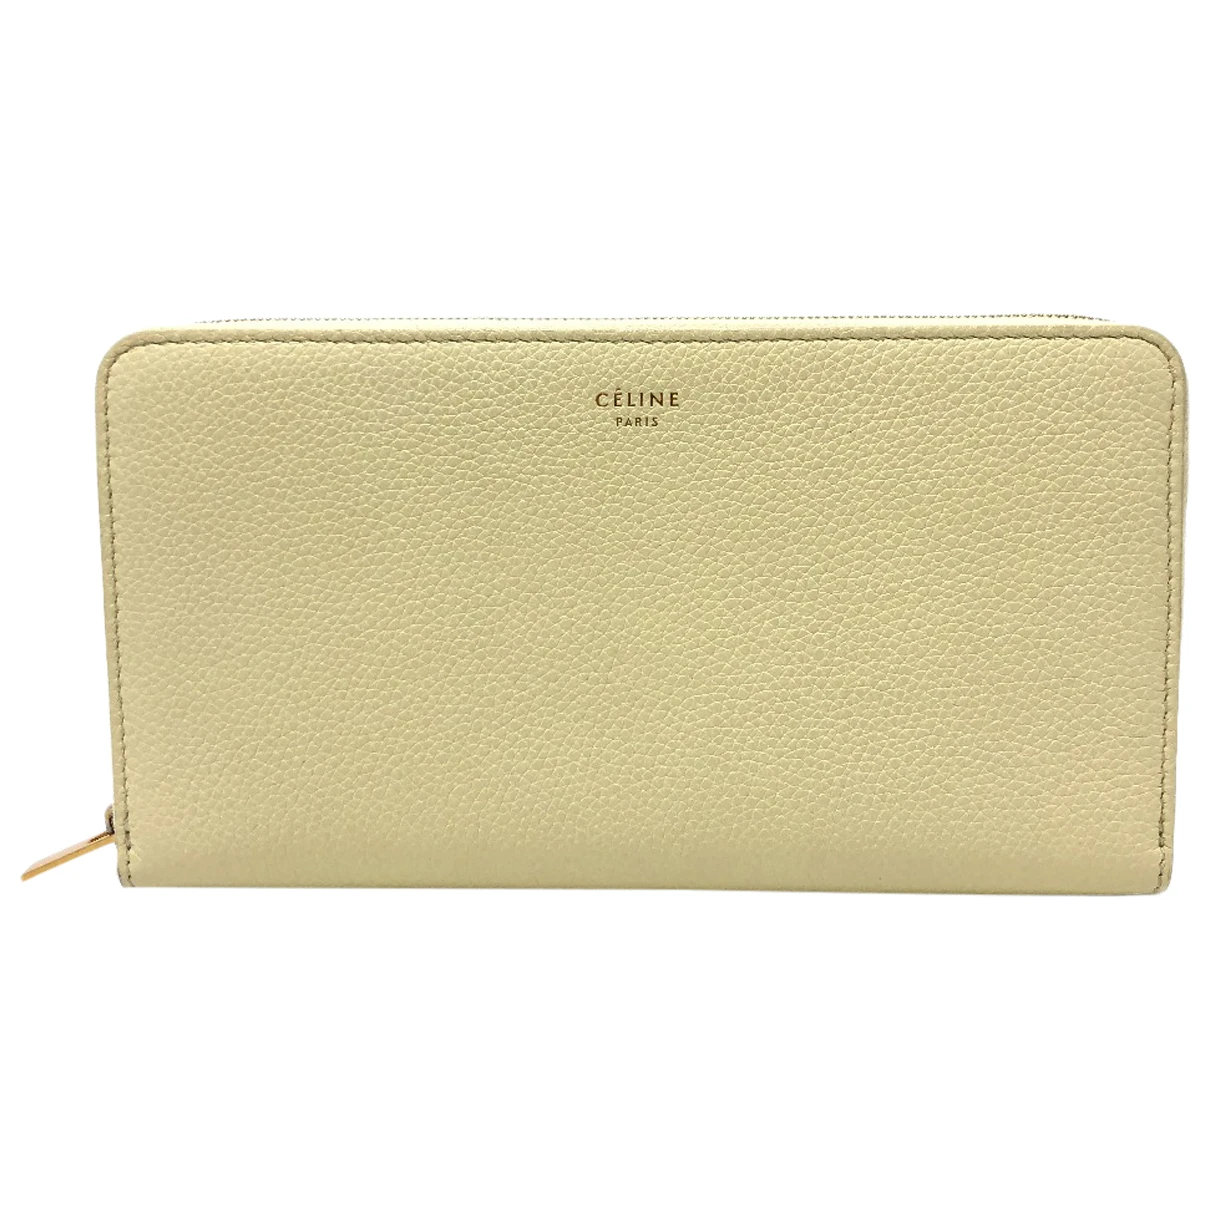 accessories Celine wallets for Female Leather. Used condition